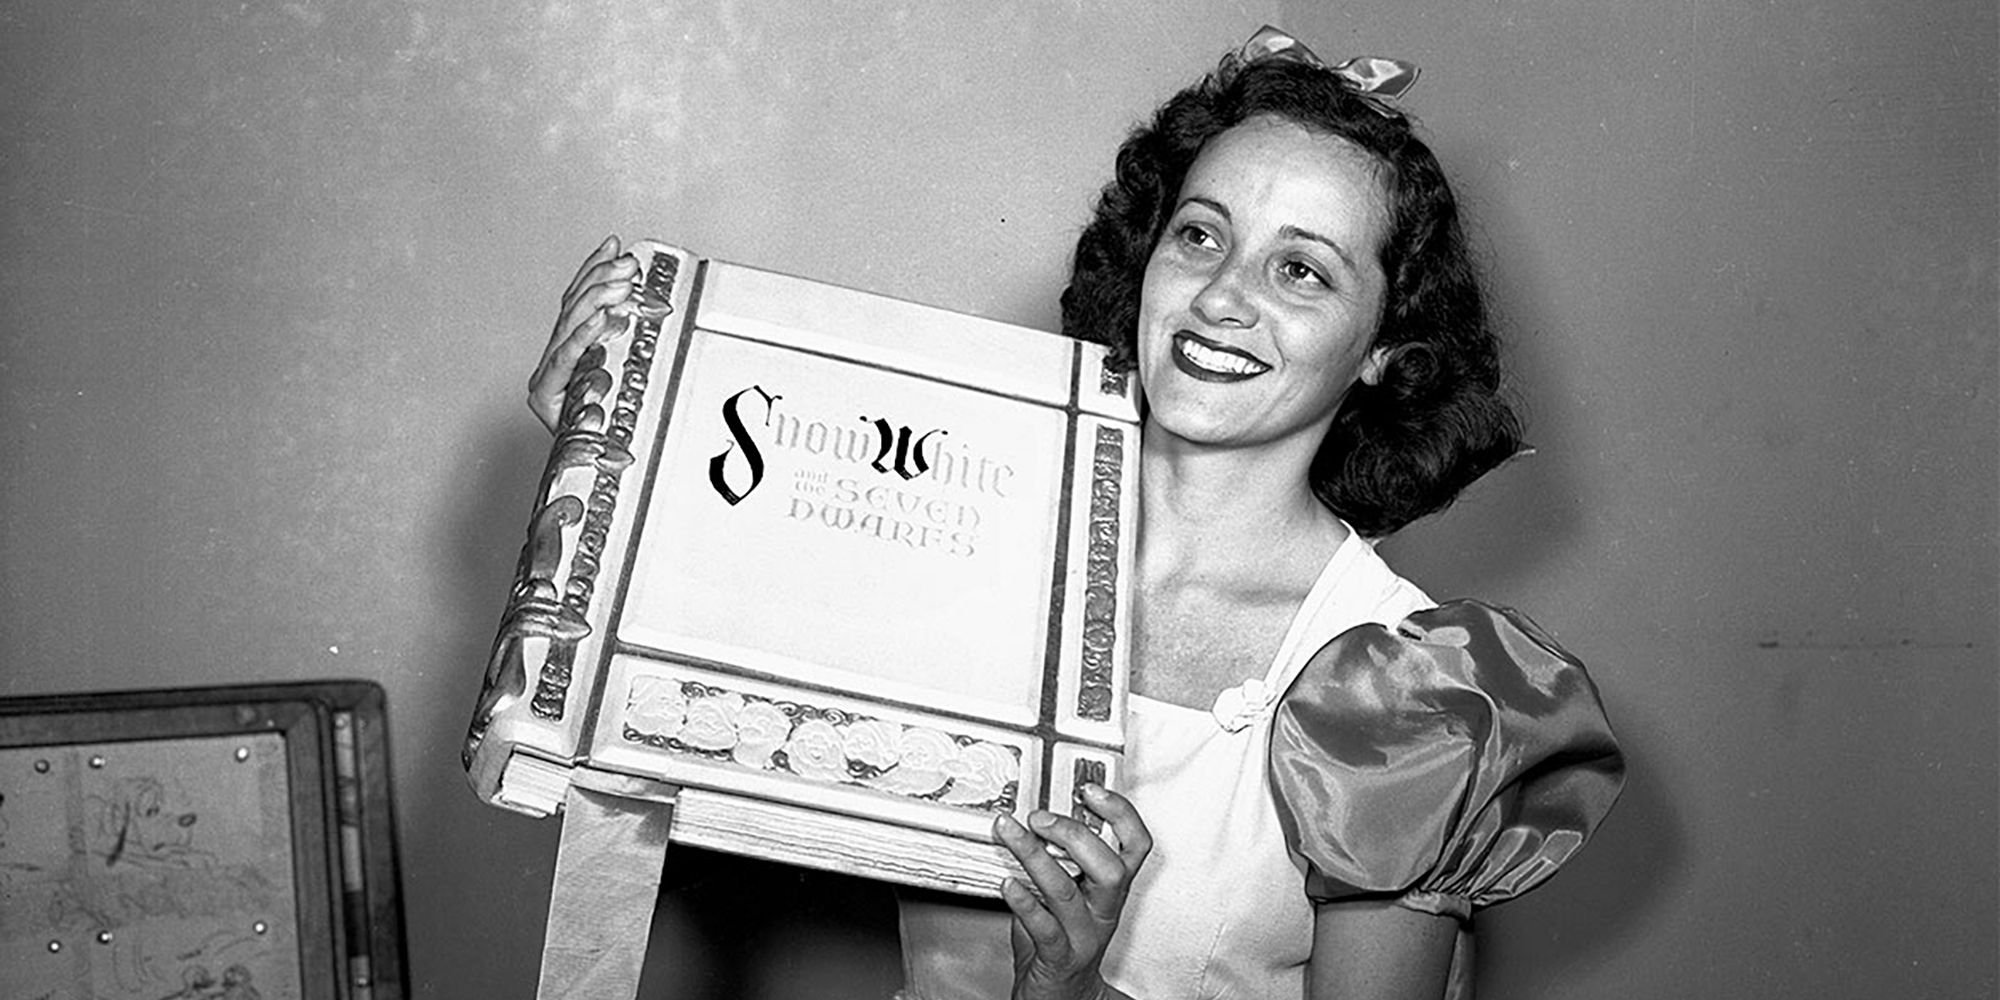 Rumors circulated as to why Adriana Caselotti, the voice of Snow White, never returned to acting